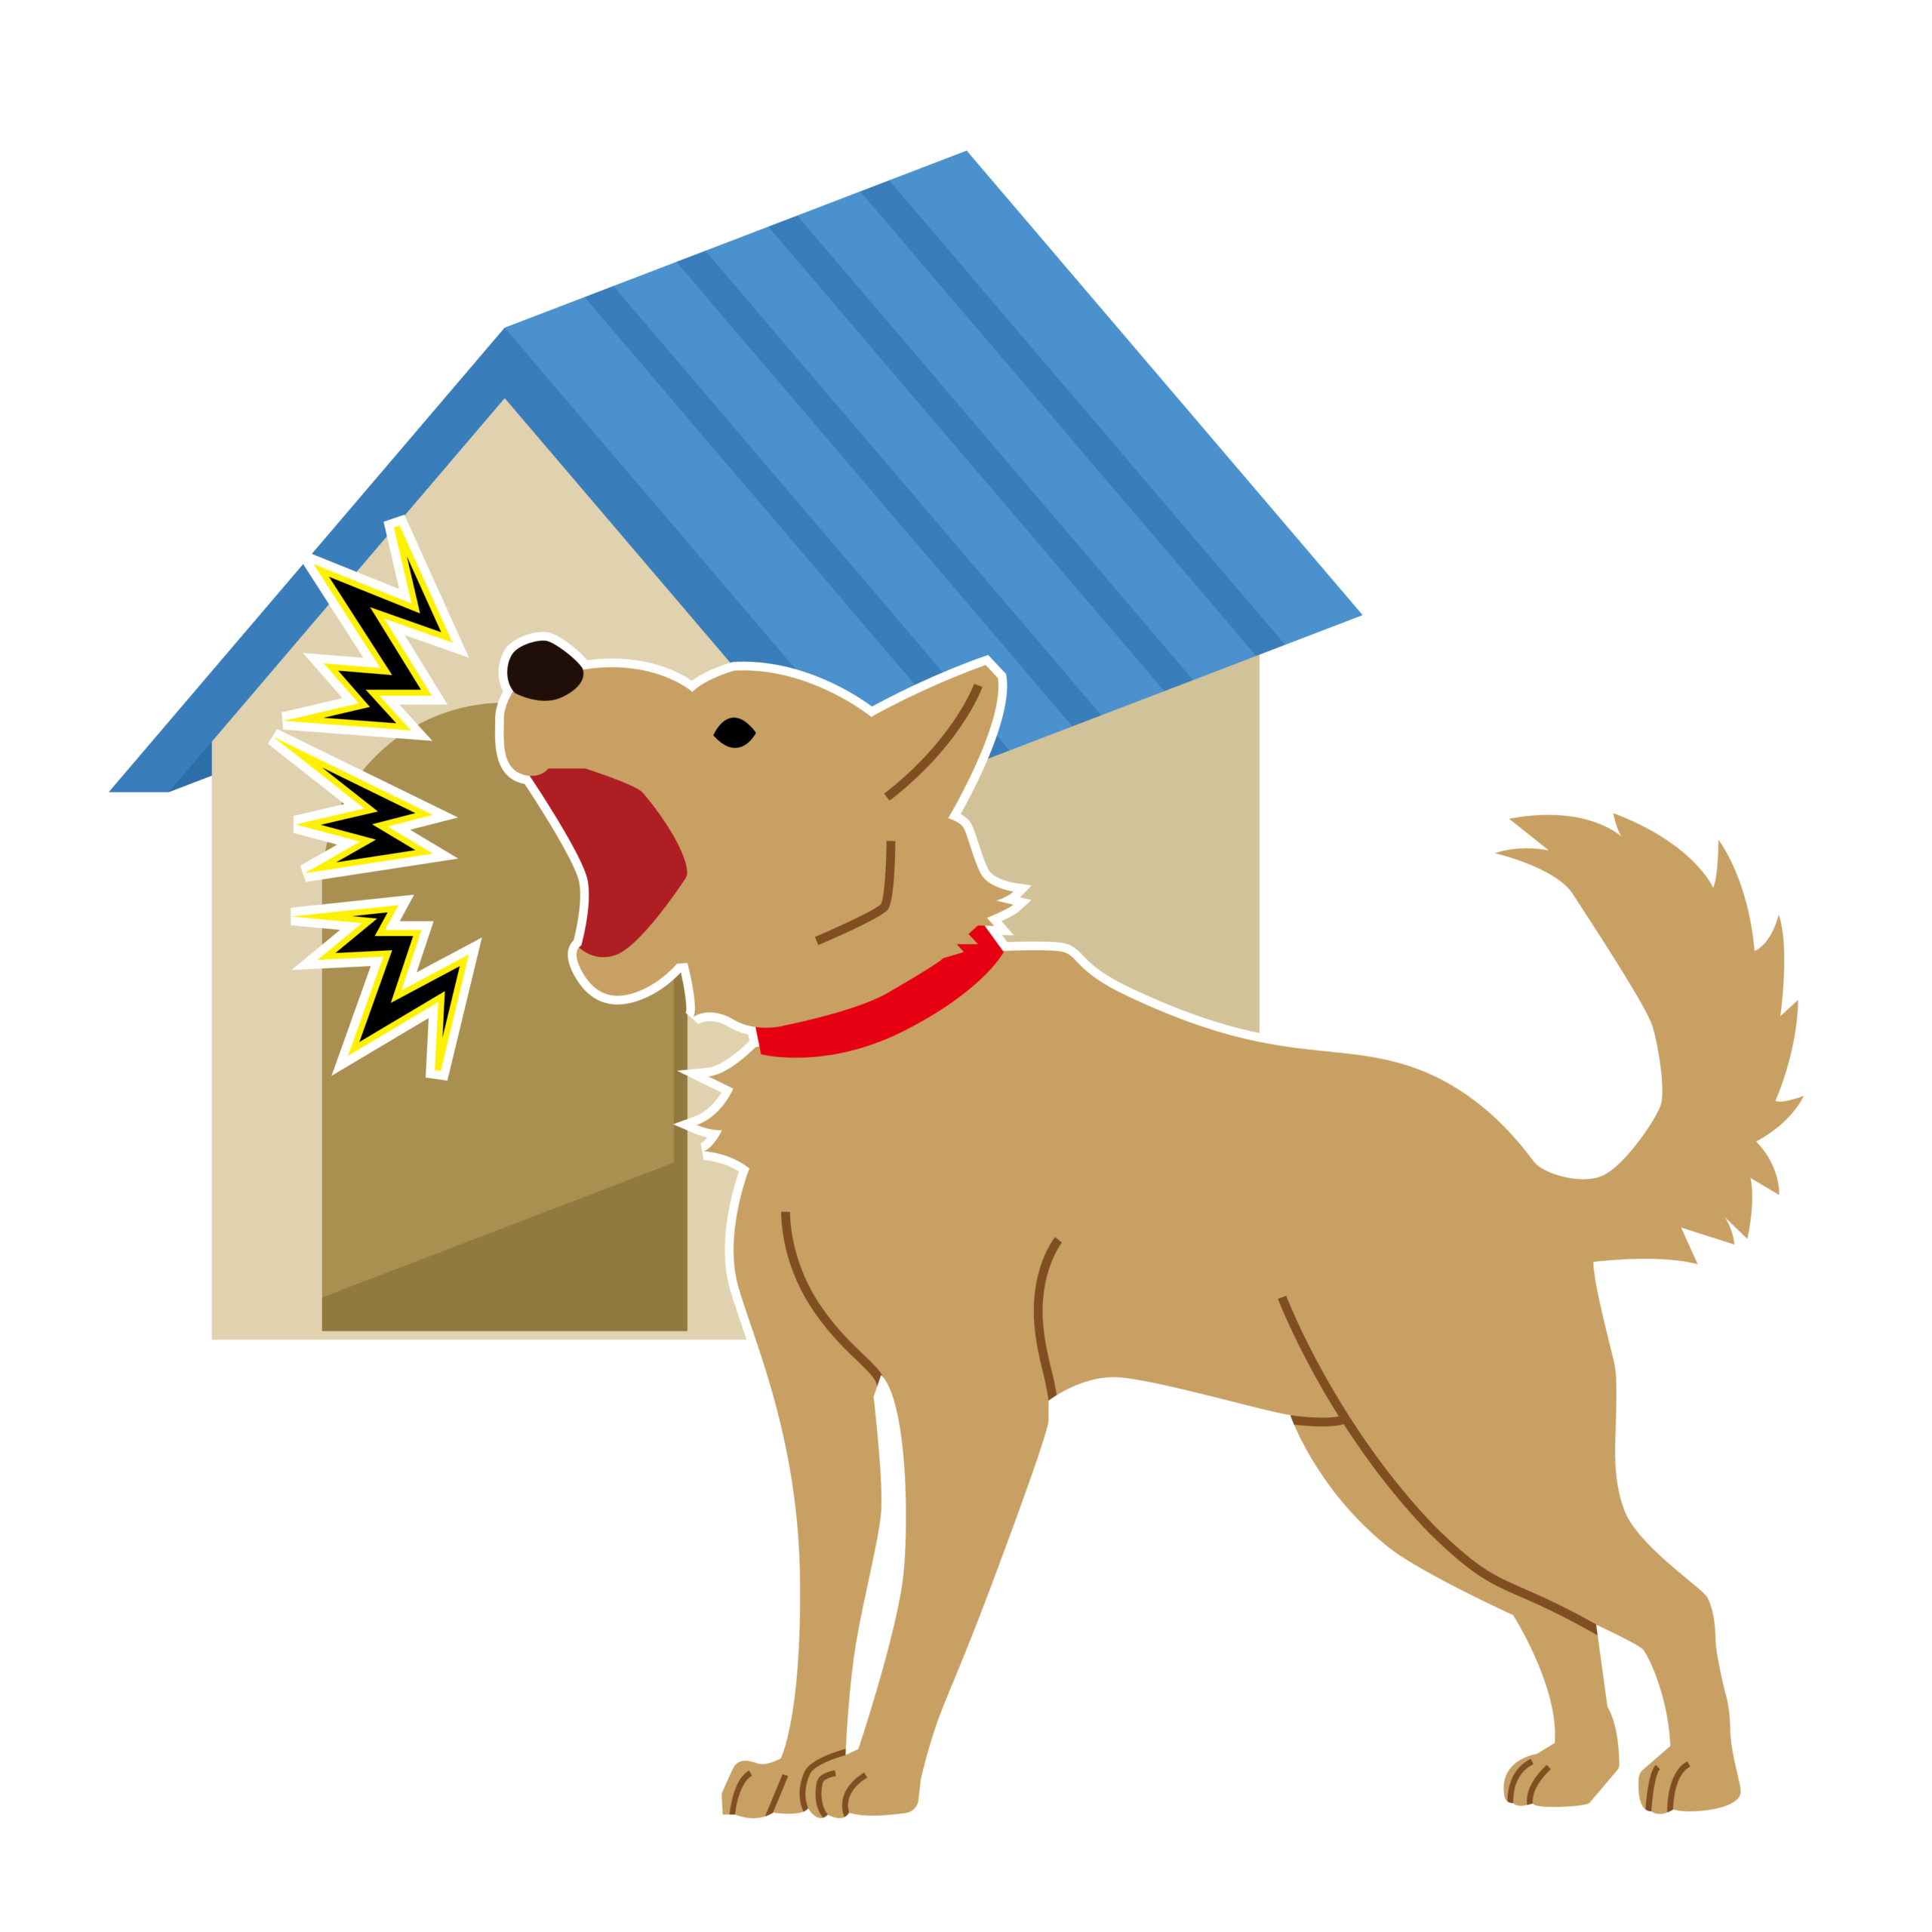 Barking Dog Cartoon Images - Free Download on Clipart Library - Clip ...